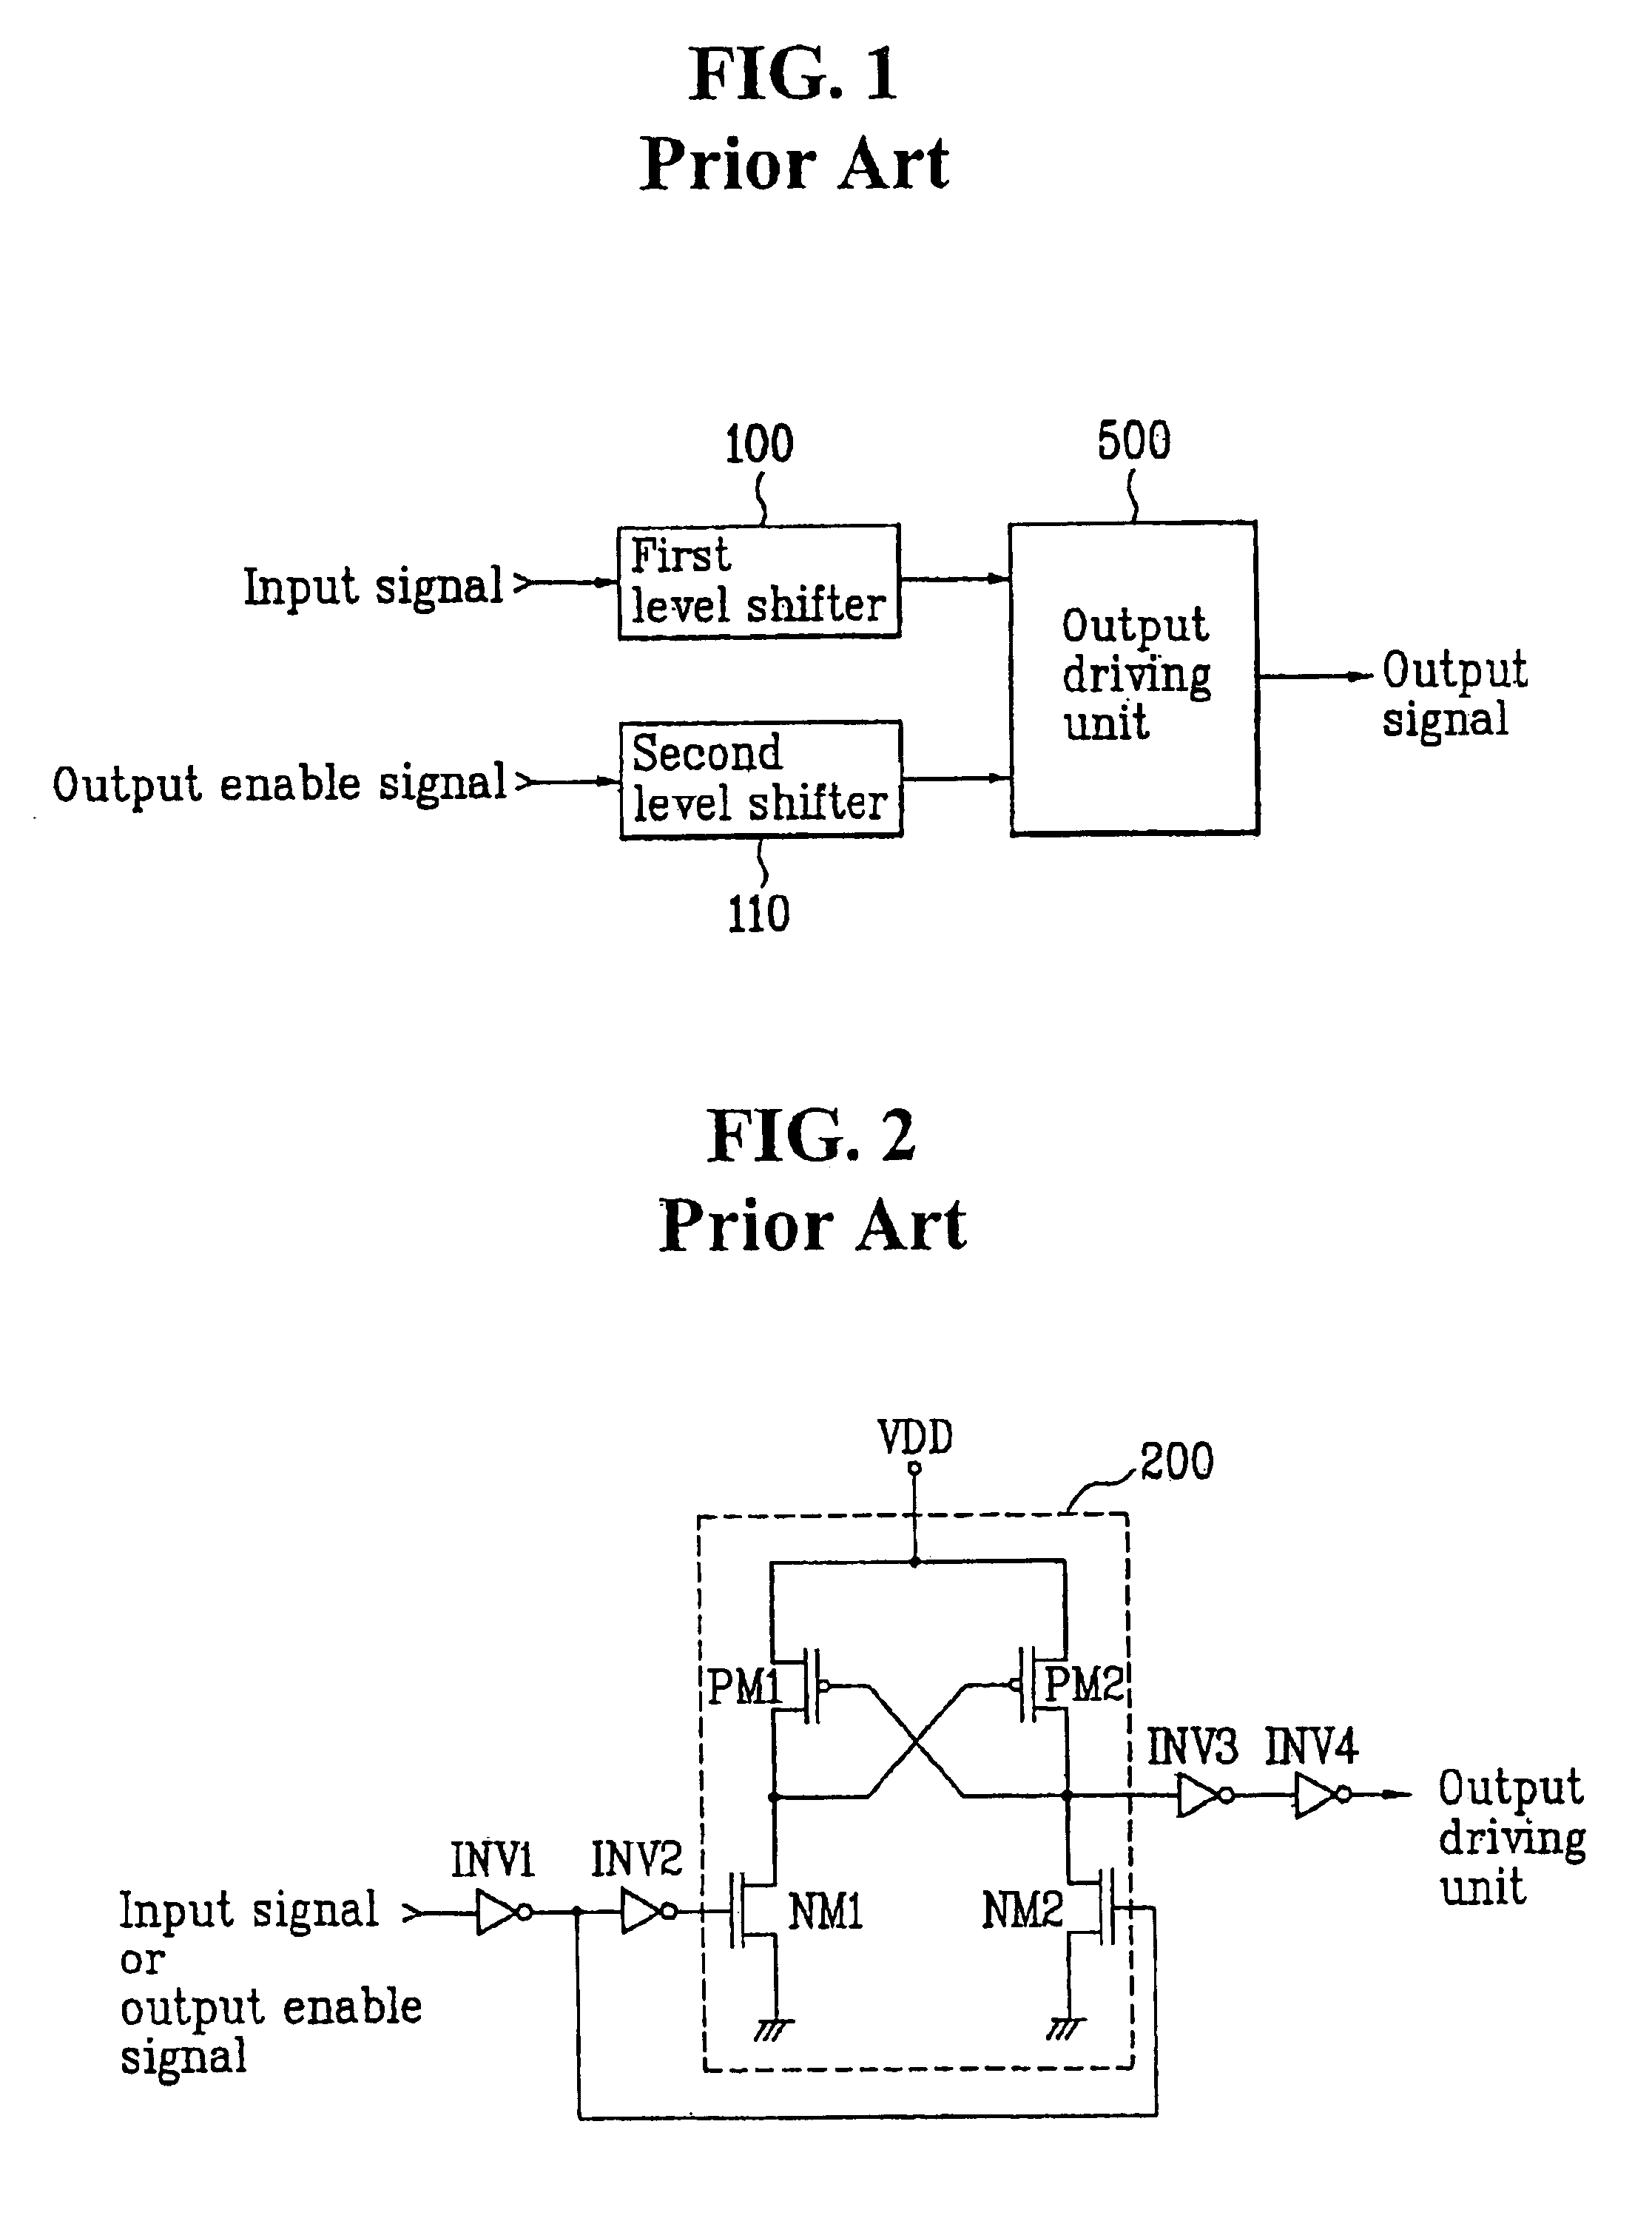 Output driving circuit for maintaining I/O signal duty ratios